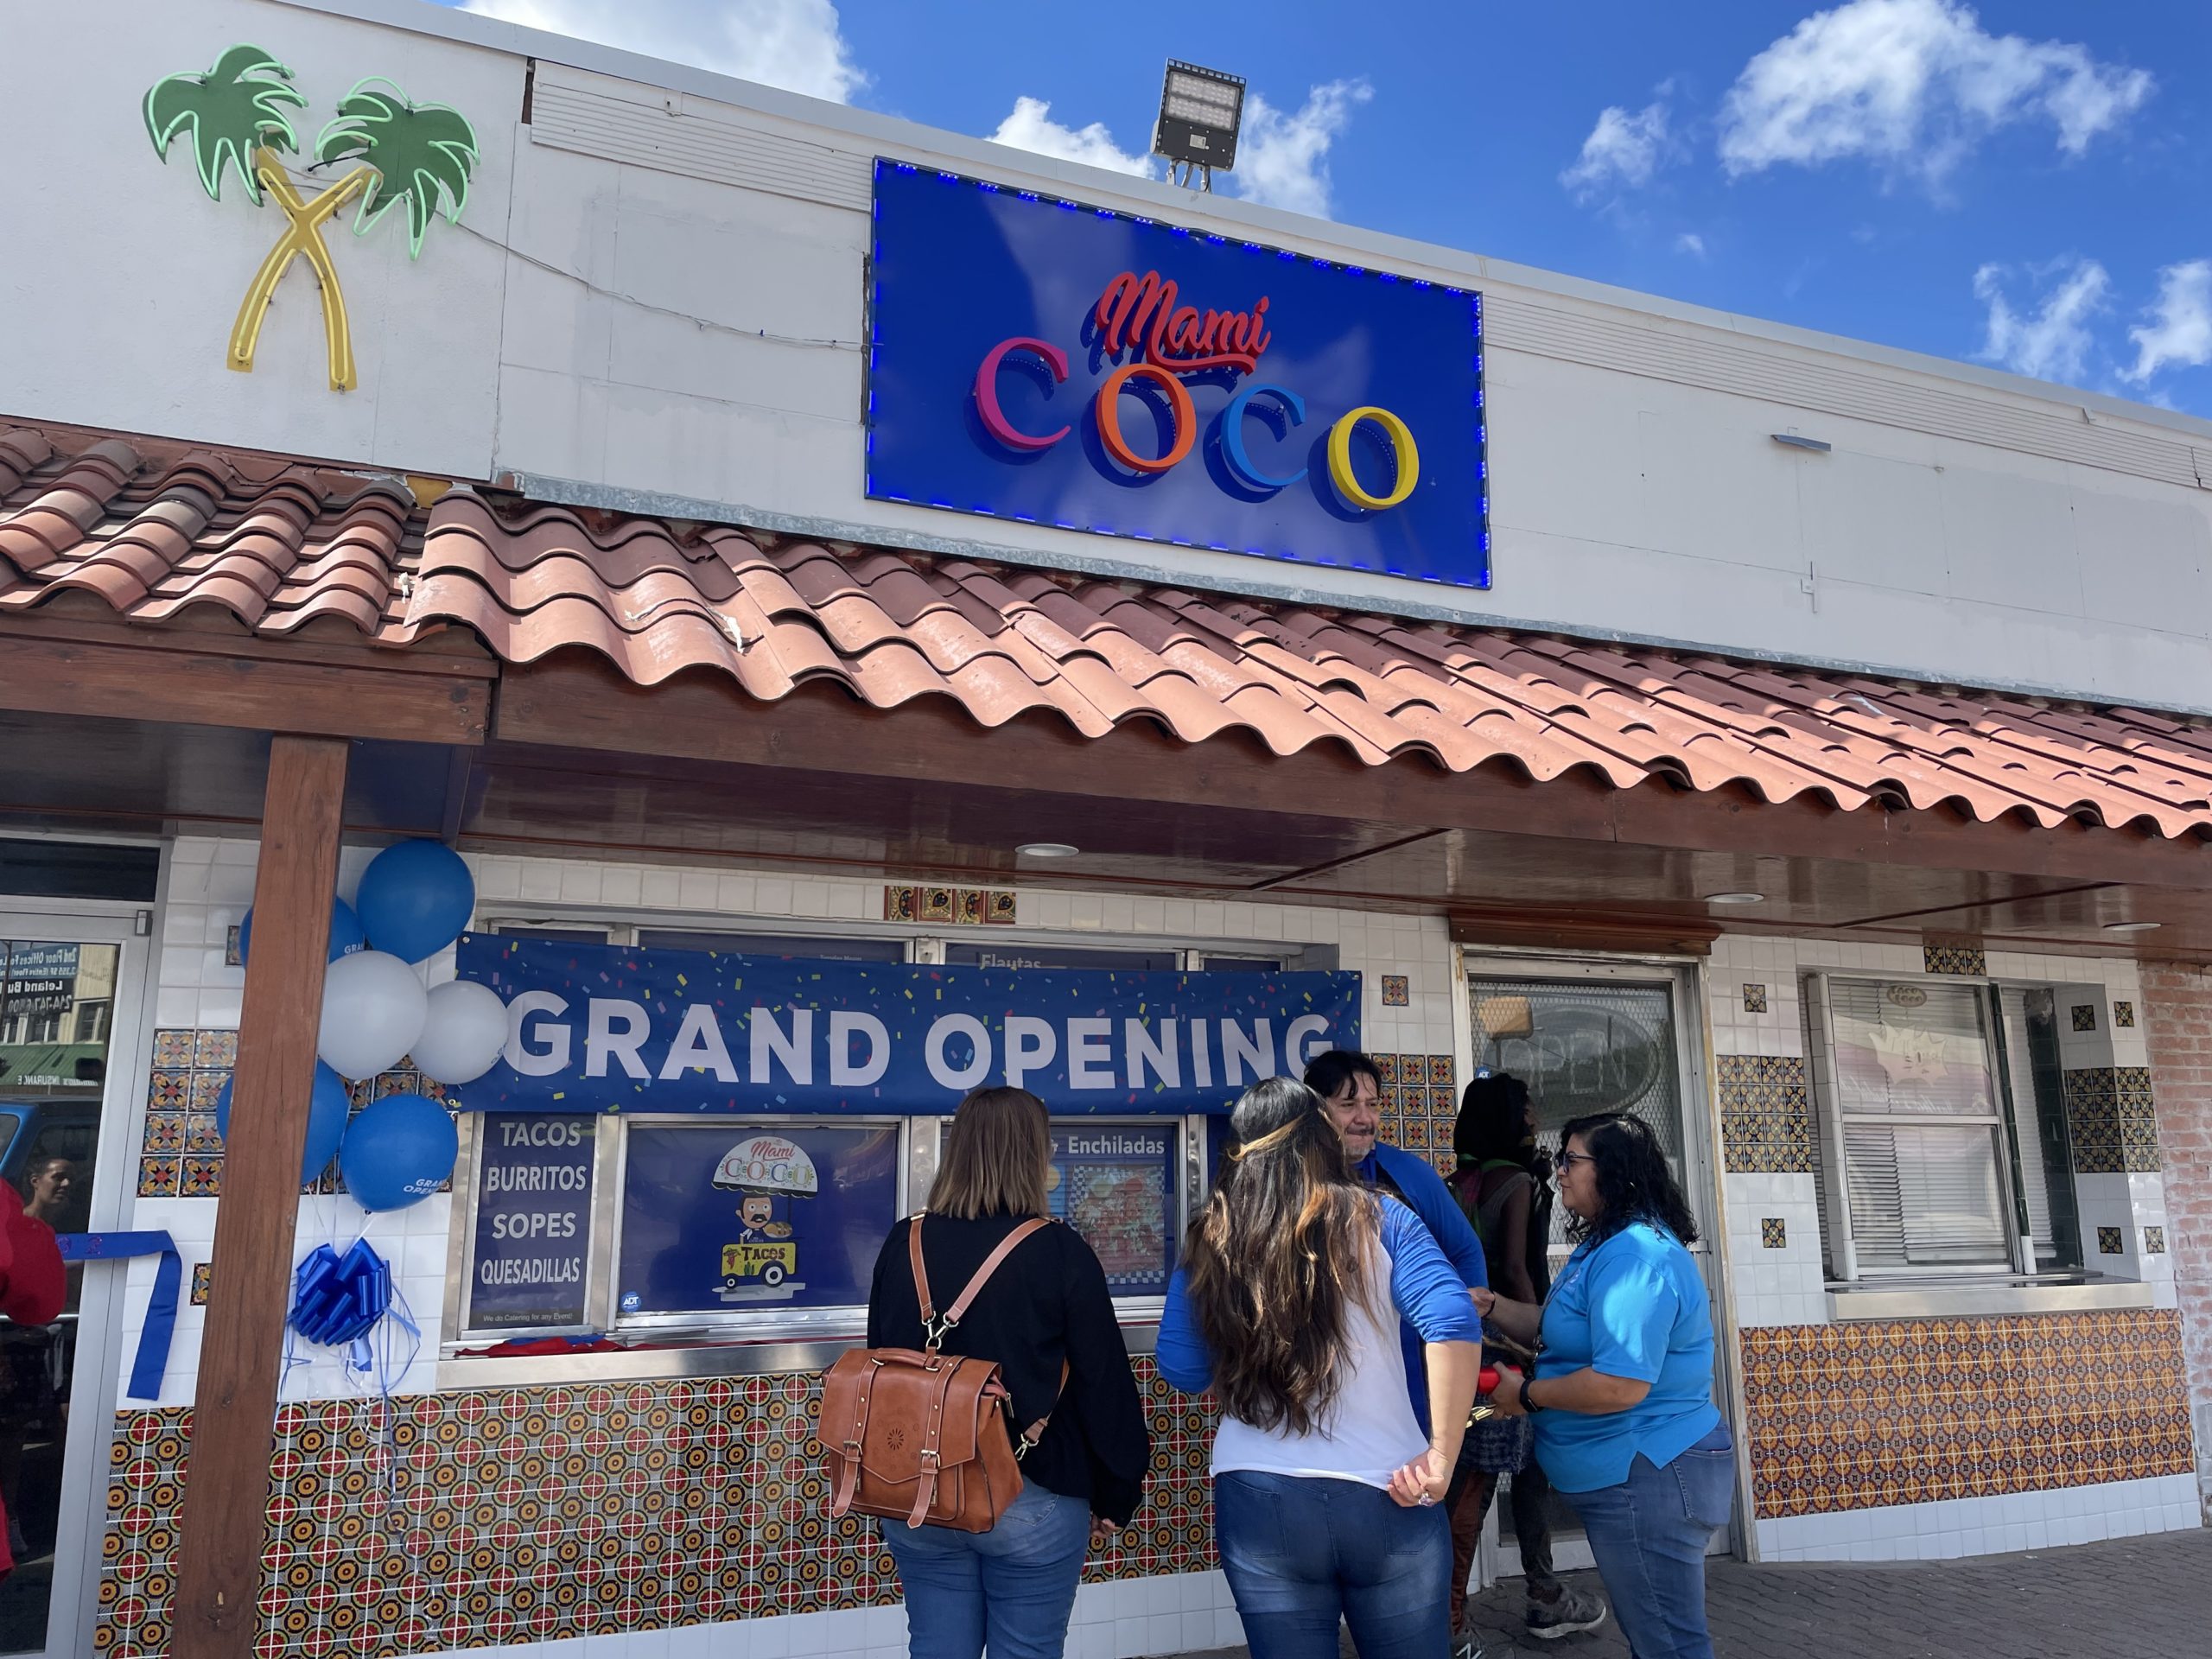 mami-coco-opens-second-location-in-east-dallas-lakewood-east-dallas